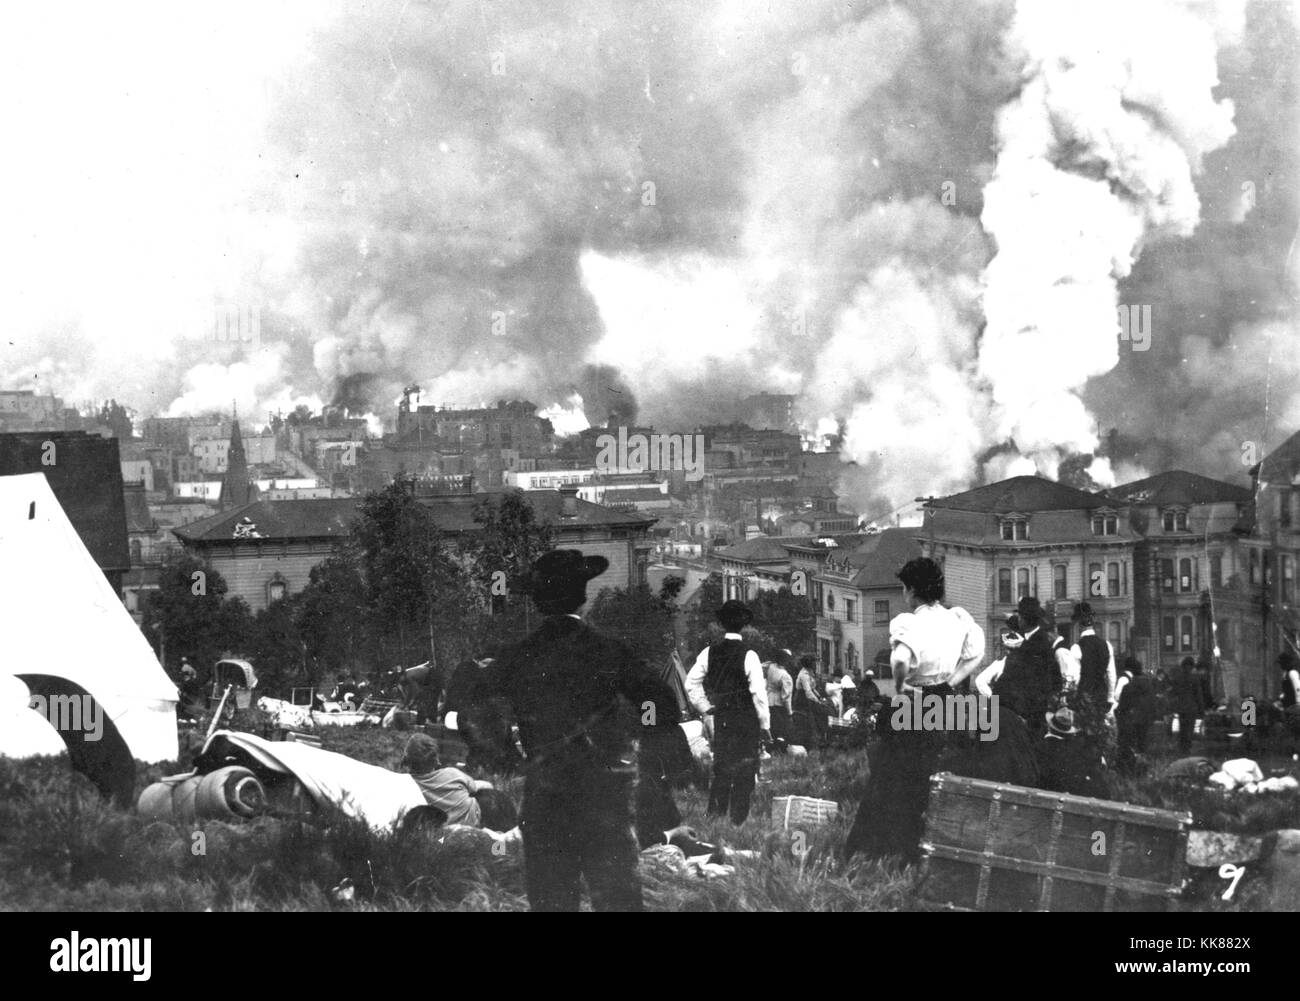 Residents overlooking downtown San Francisco as fires breakout across the city after the 1906 earthquake. The event that took place in 1906 measured equivalent to M7.9 and ruptured 296 miles along the San Andreas fault. Image courtesy USGS. 2014. Stock Photo